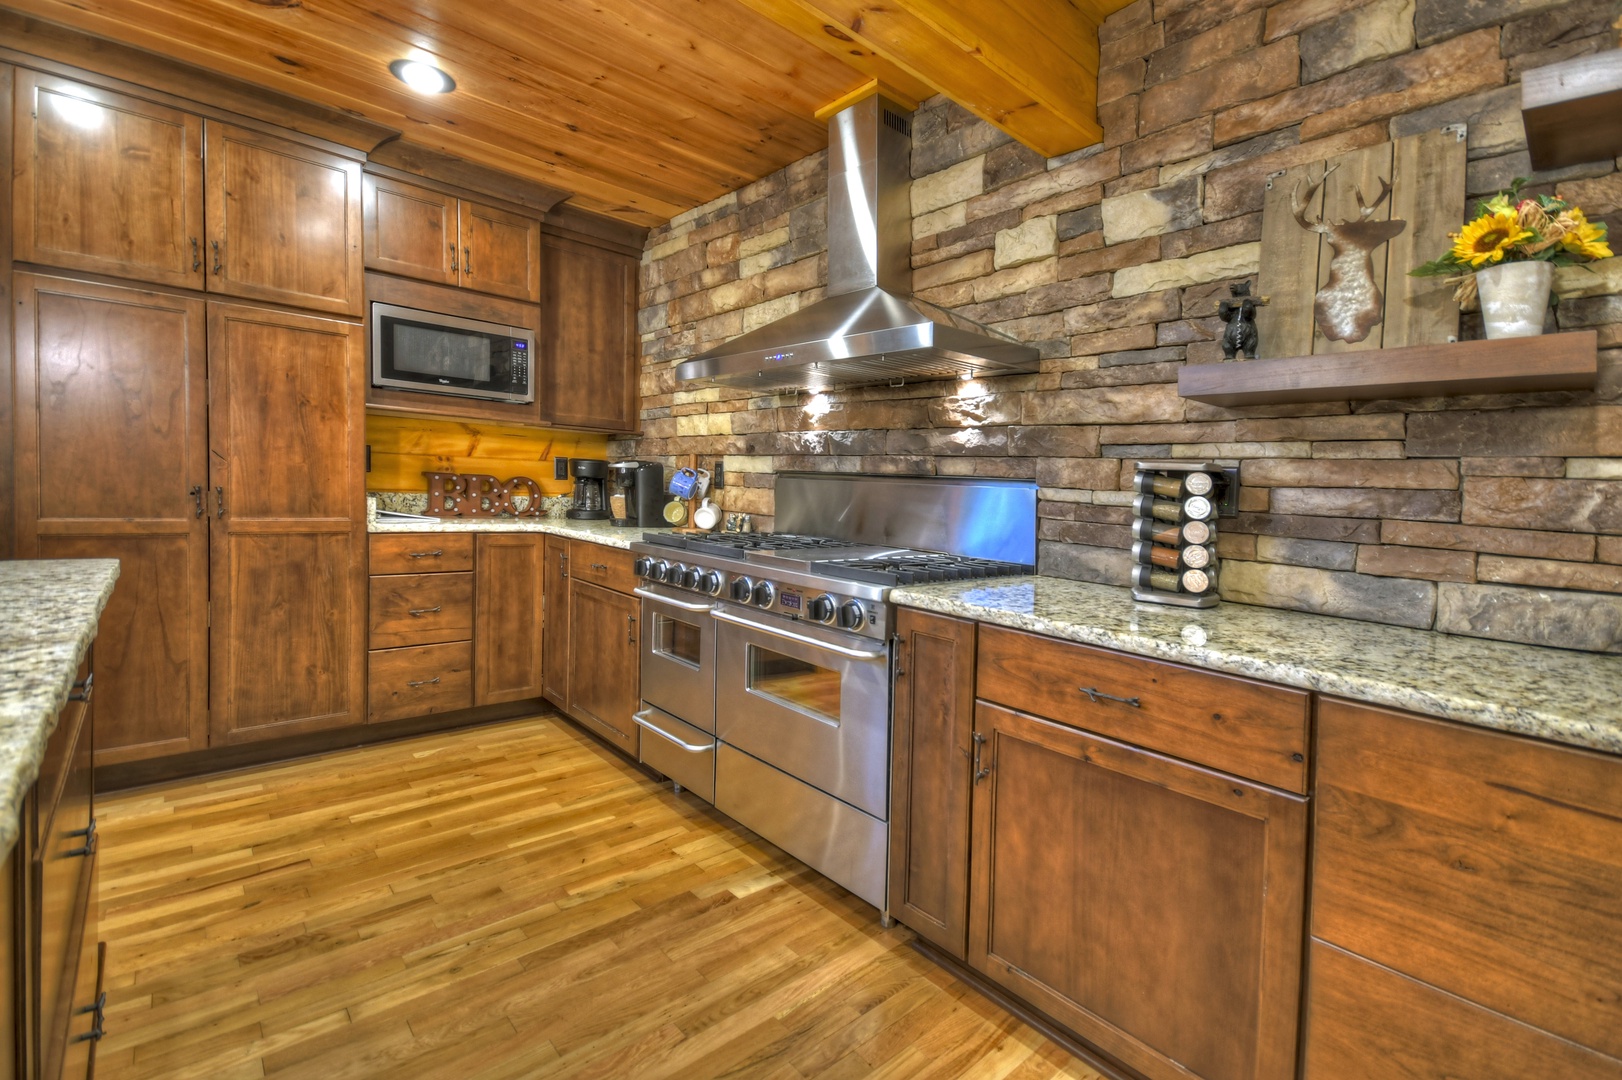 Hogback Haven- Kitchen area with stove appliances